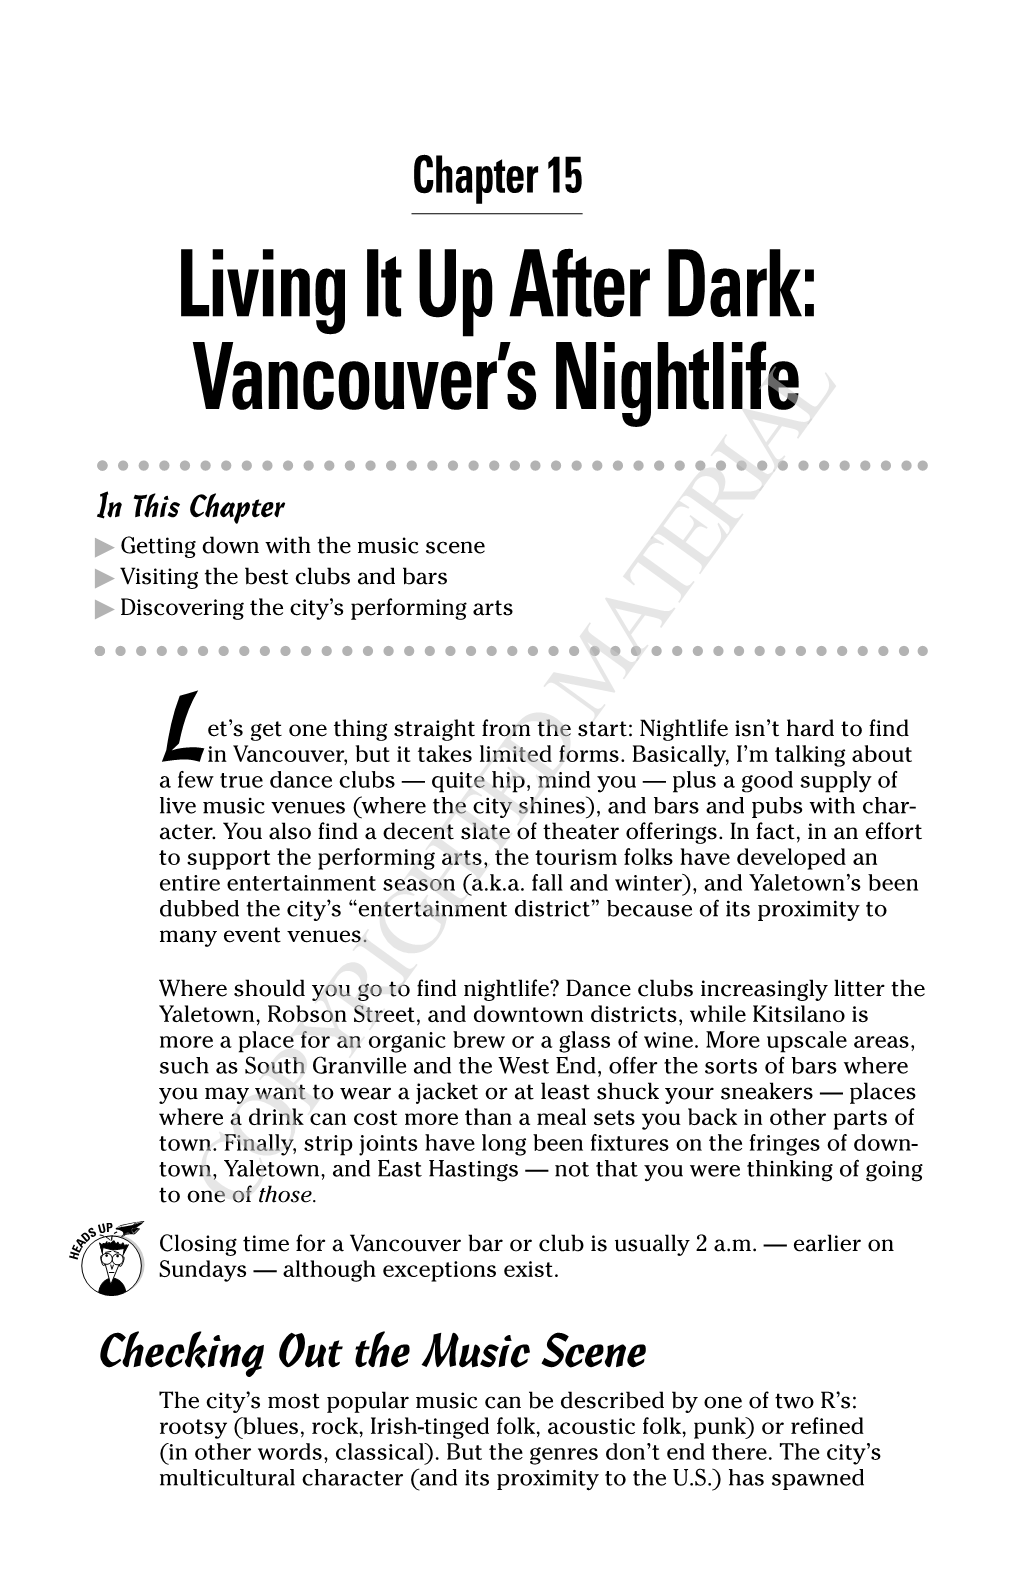 Living It up After Dark: Vancouver's Nightlife